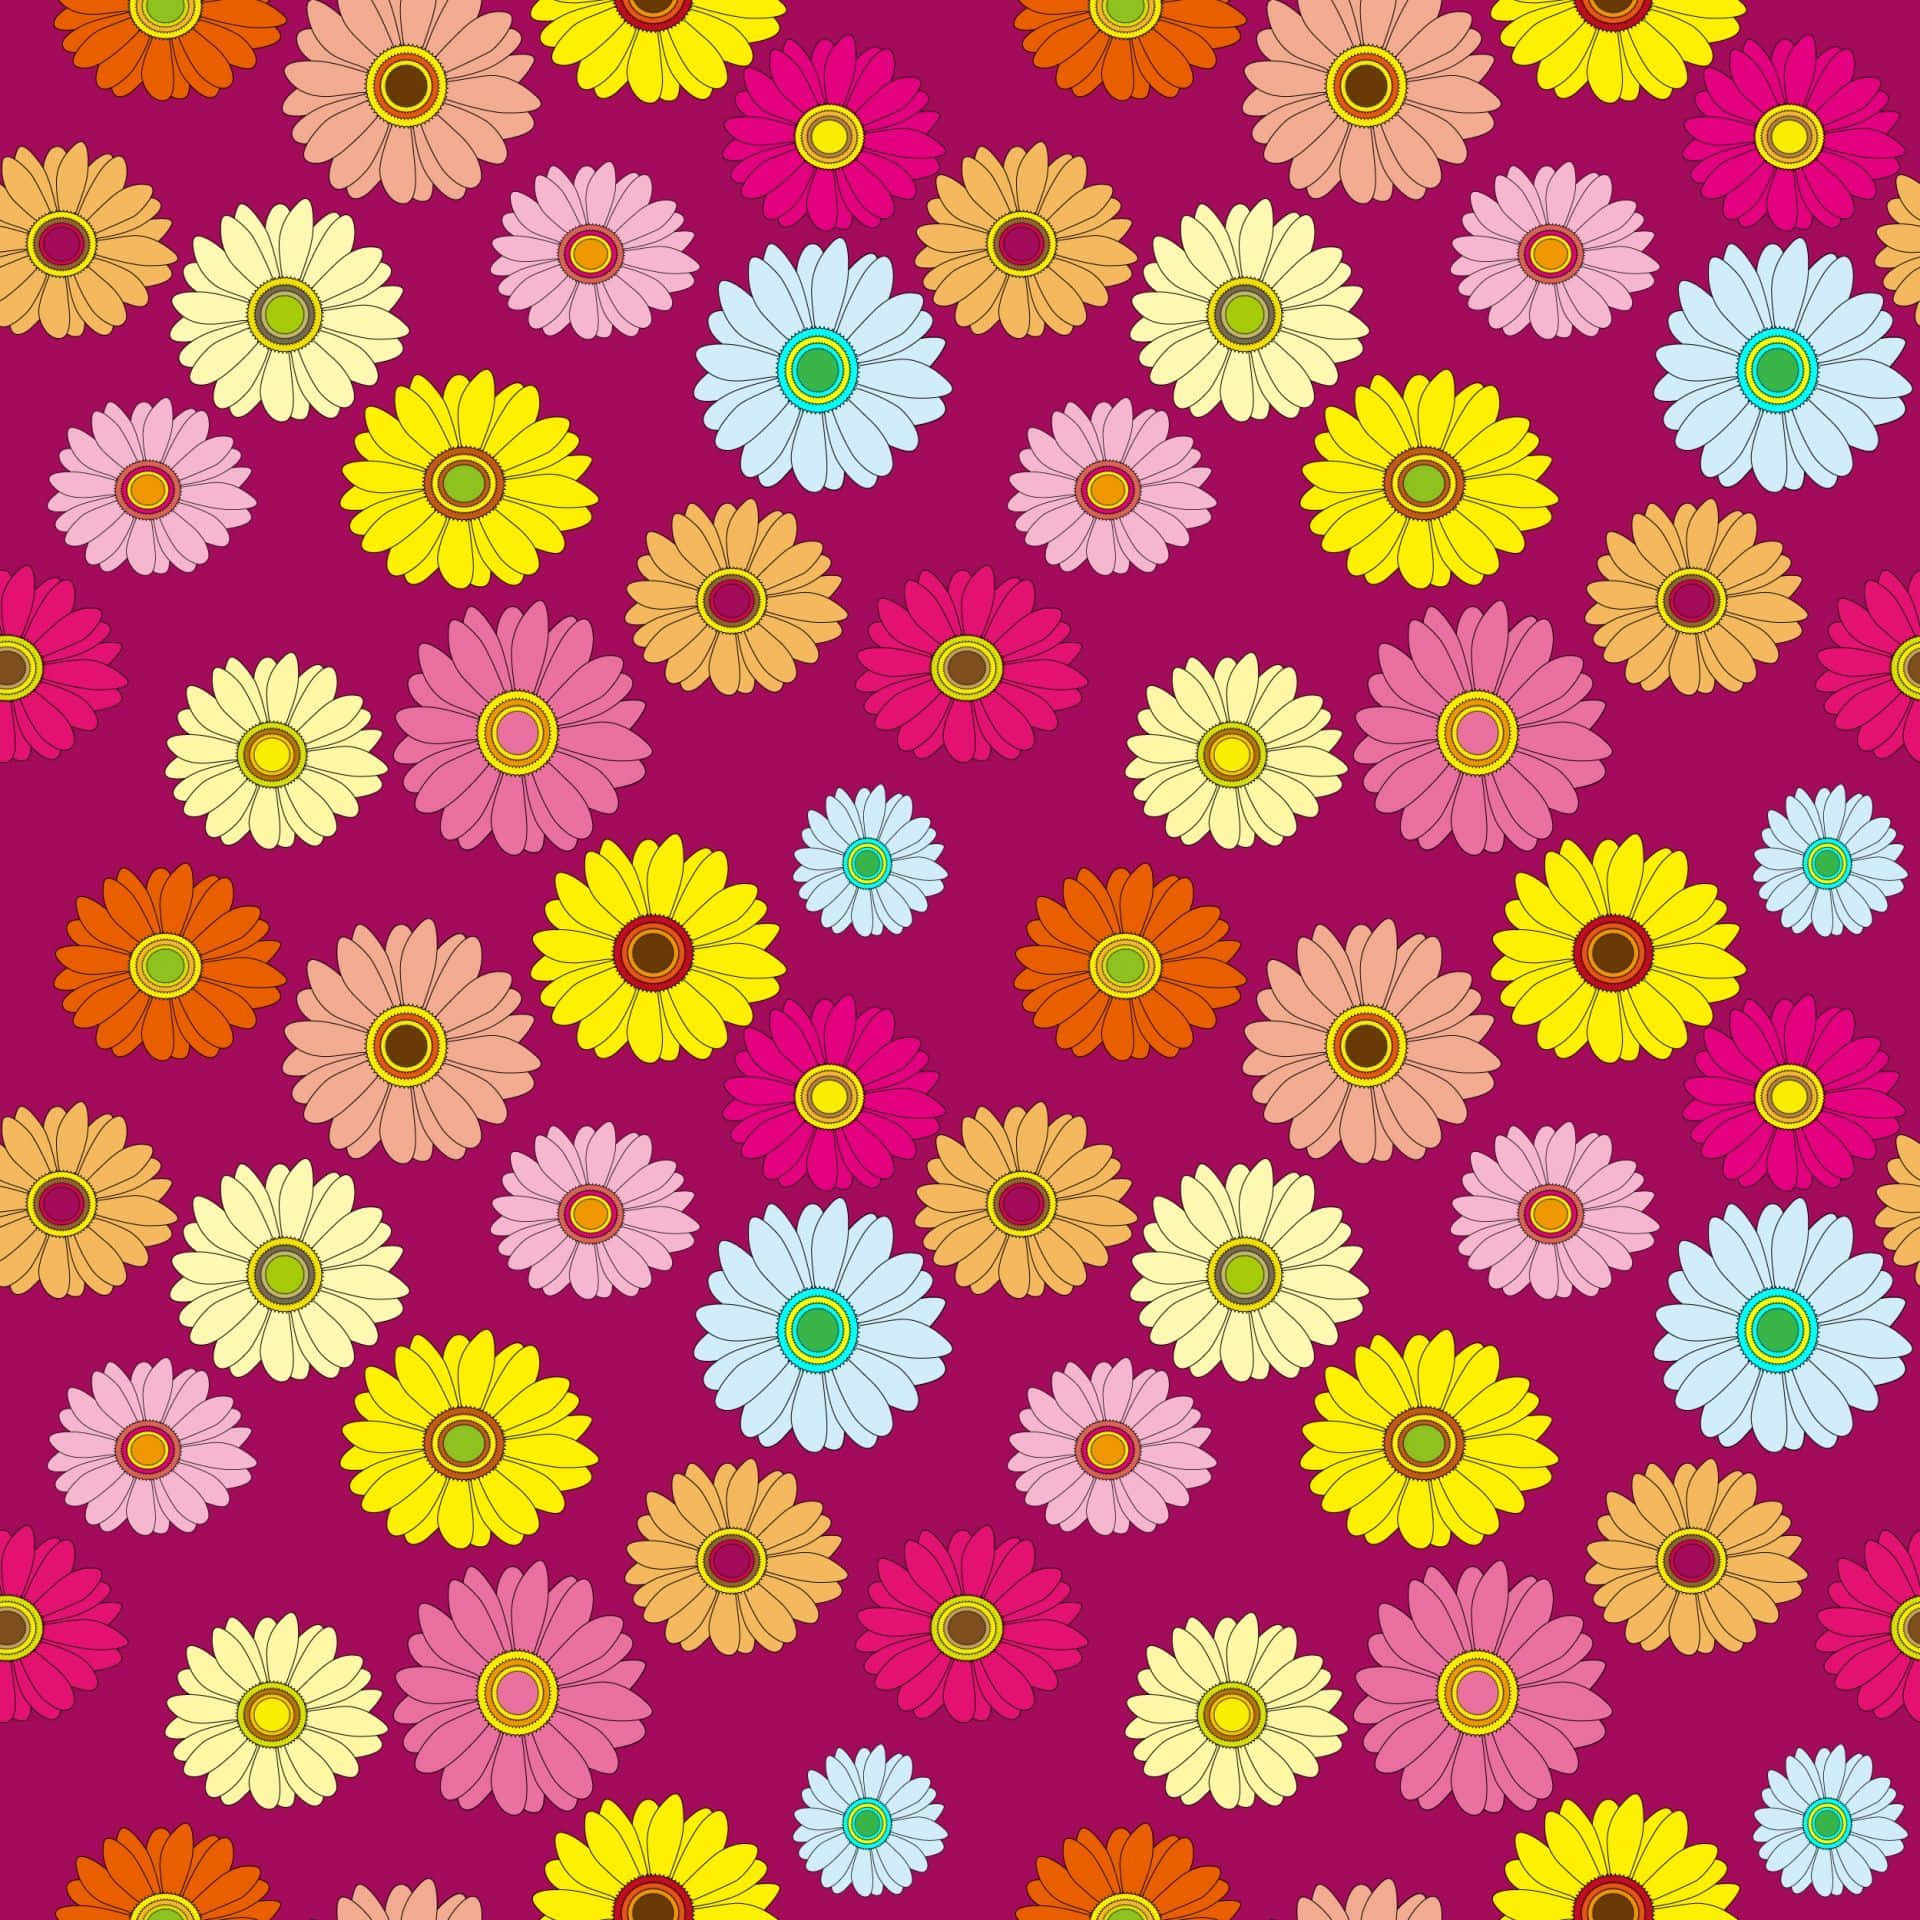 Hd Pattern Multi-colored Daisies Wallpaper